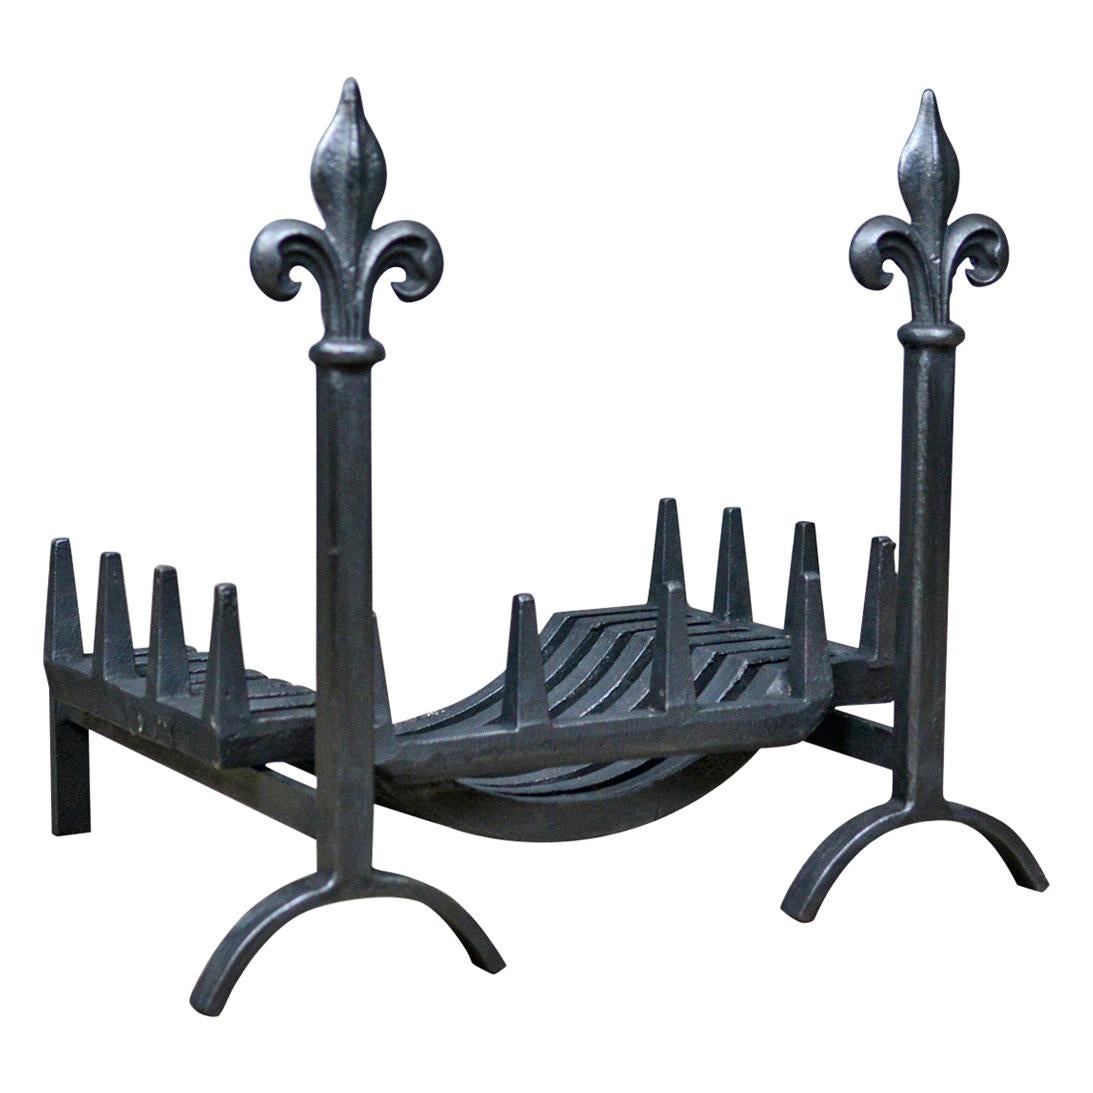 Antique Fire Basket, Grate, Dogs, Andirons, English, Victorian, circa 1900